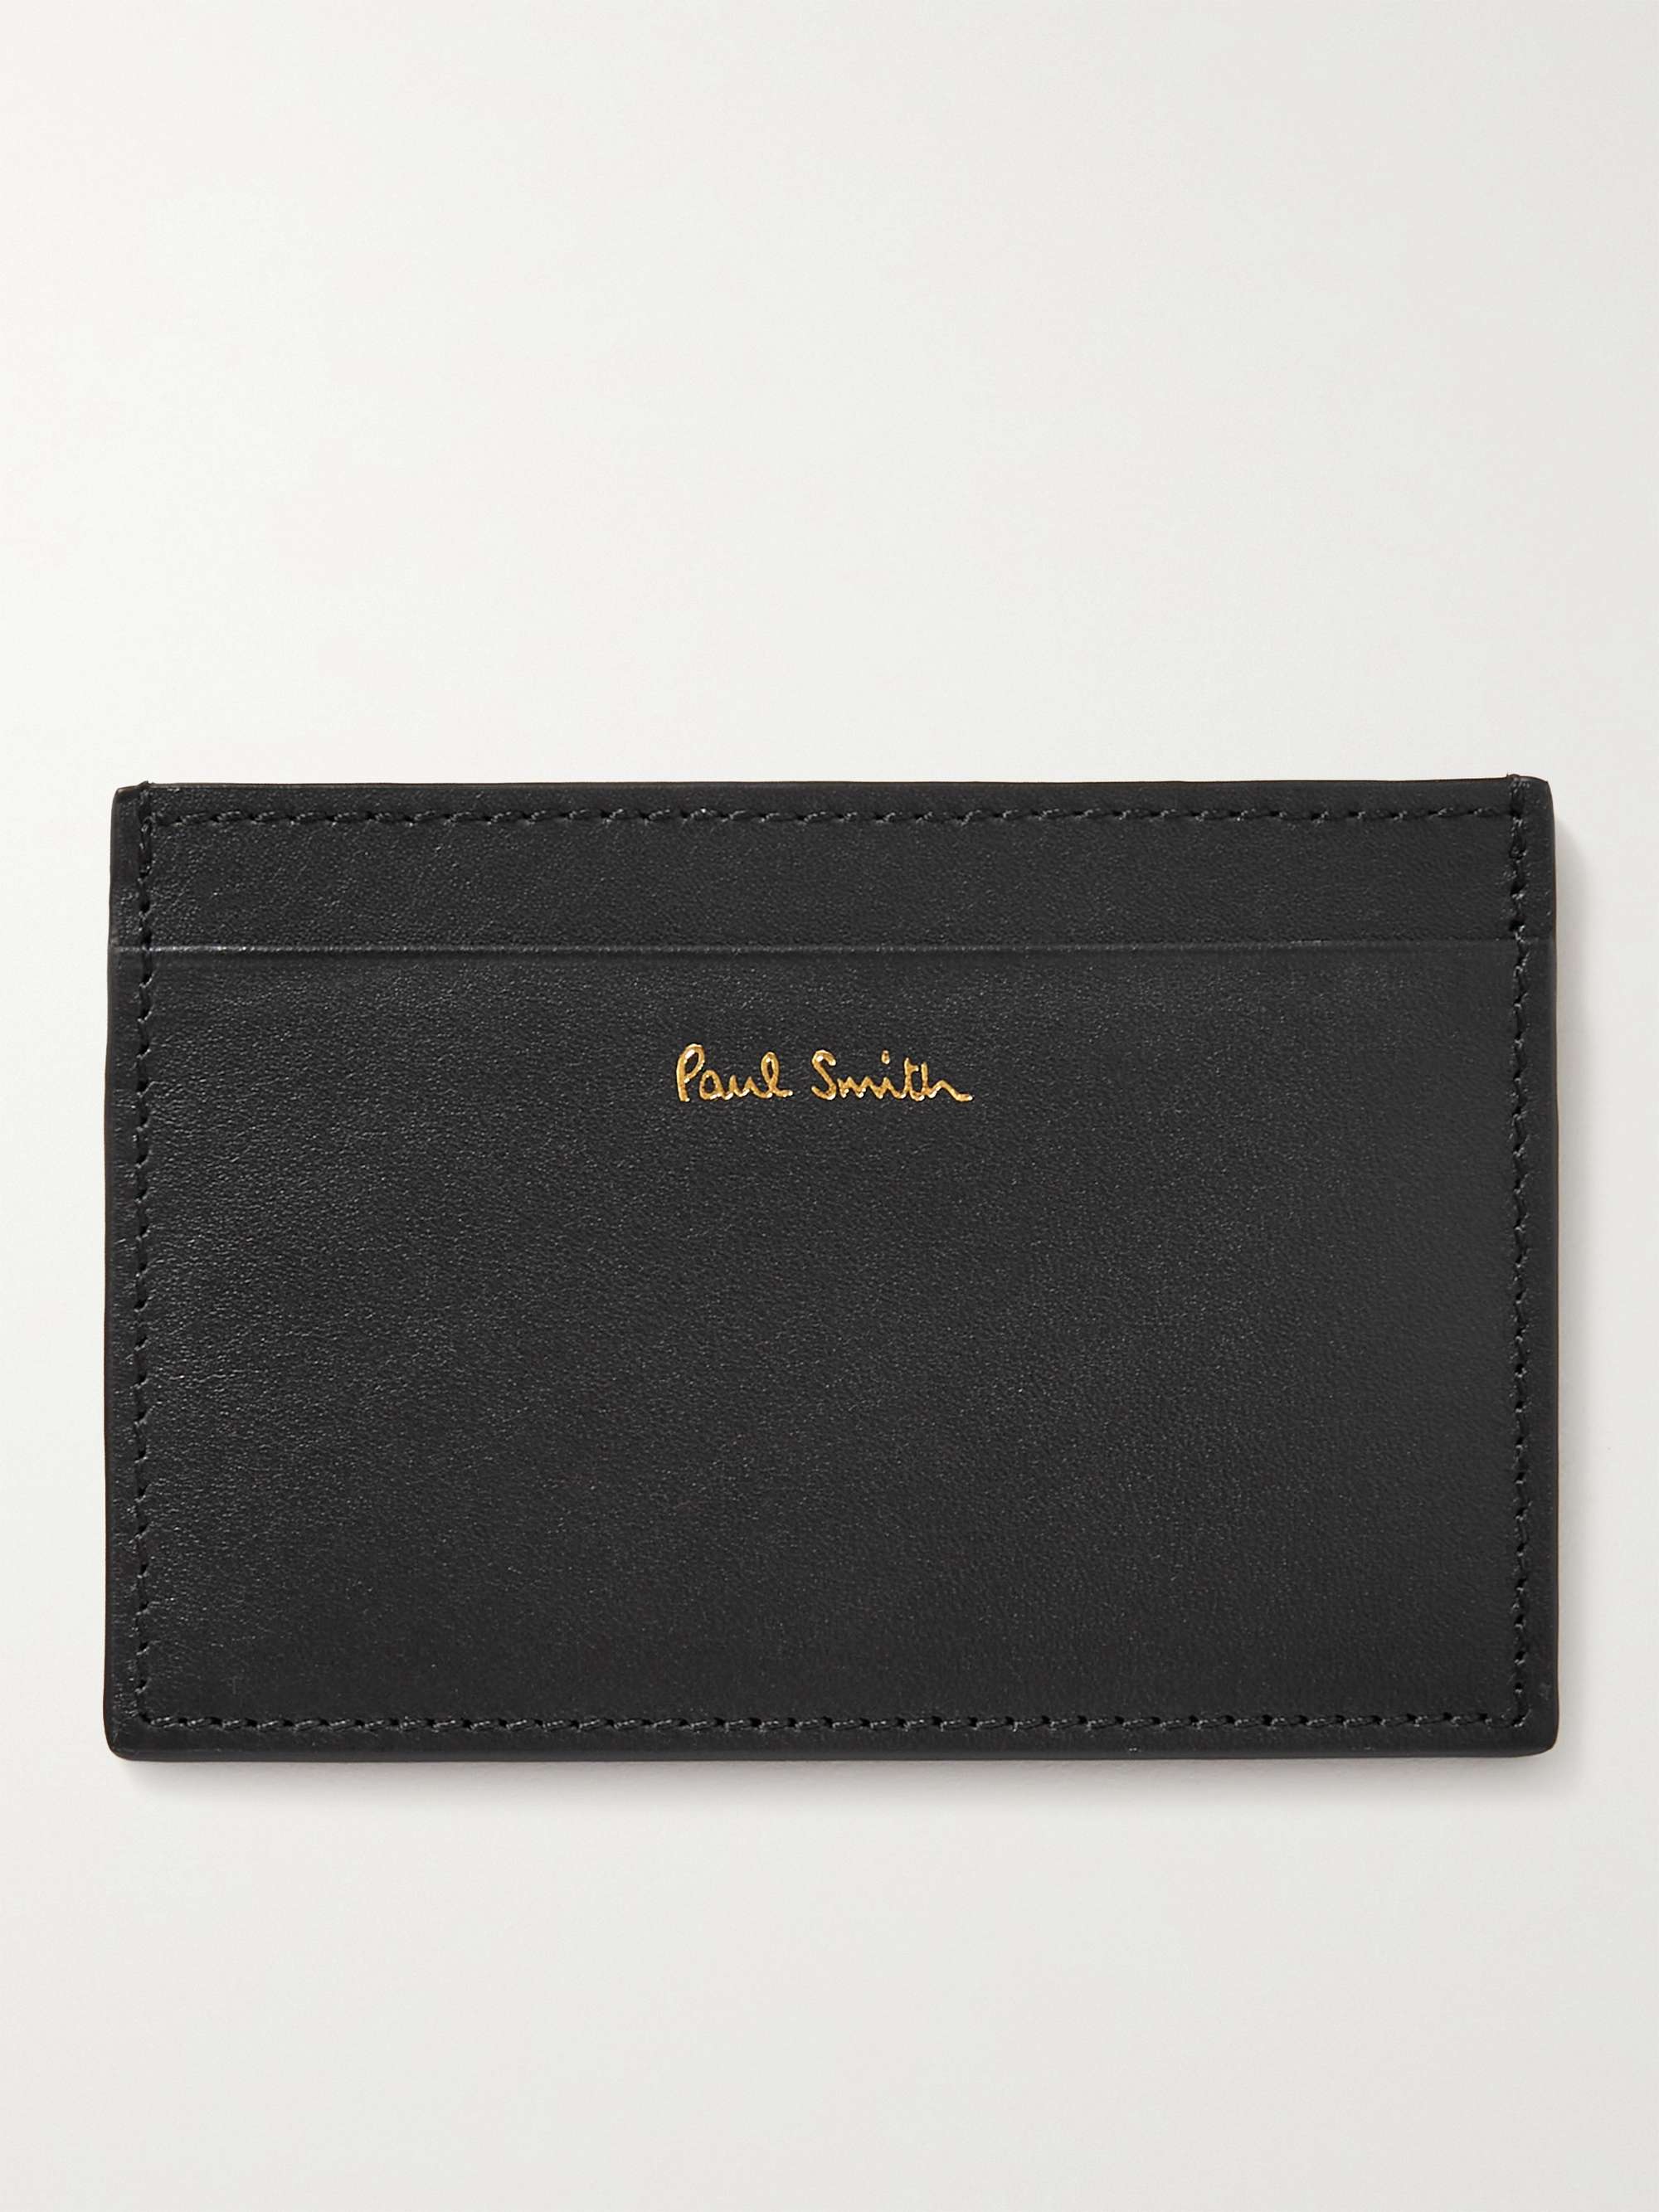 PAUL SMITH Striped Leather Cardholder